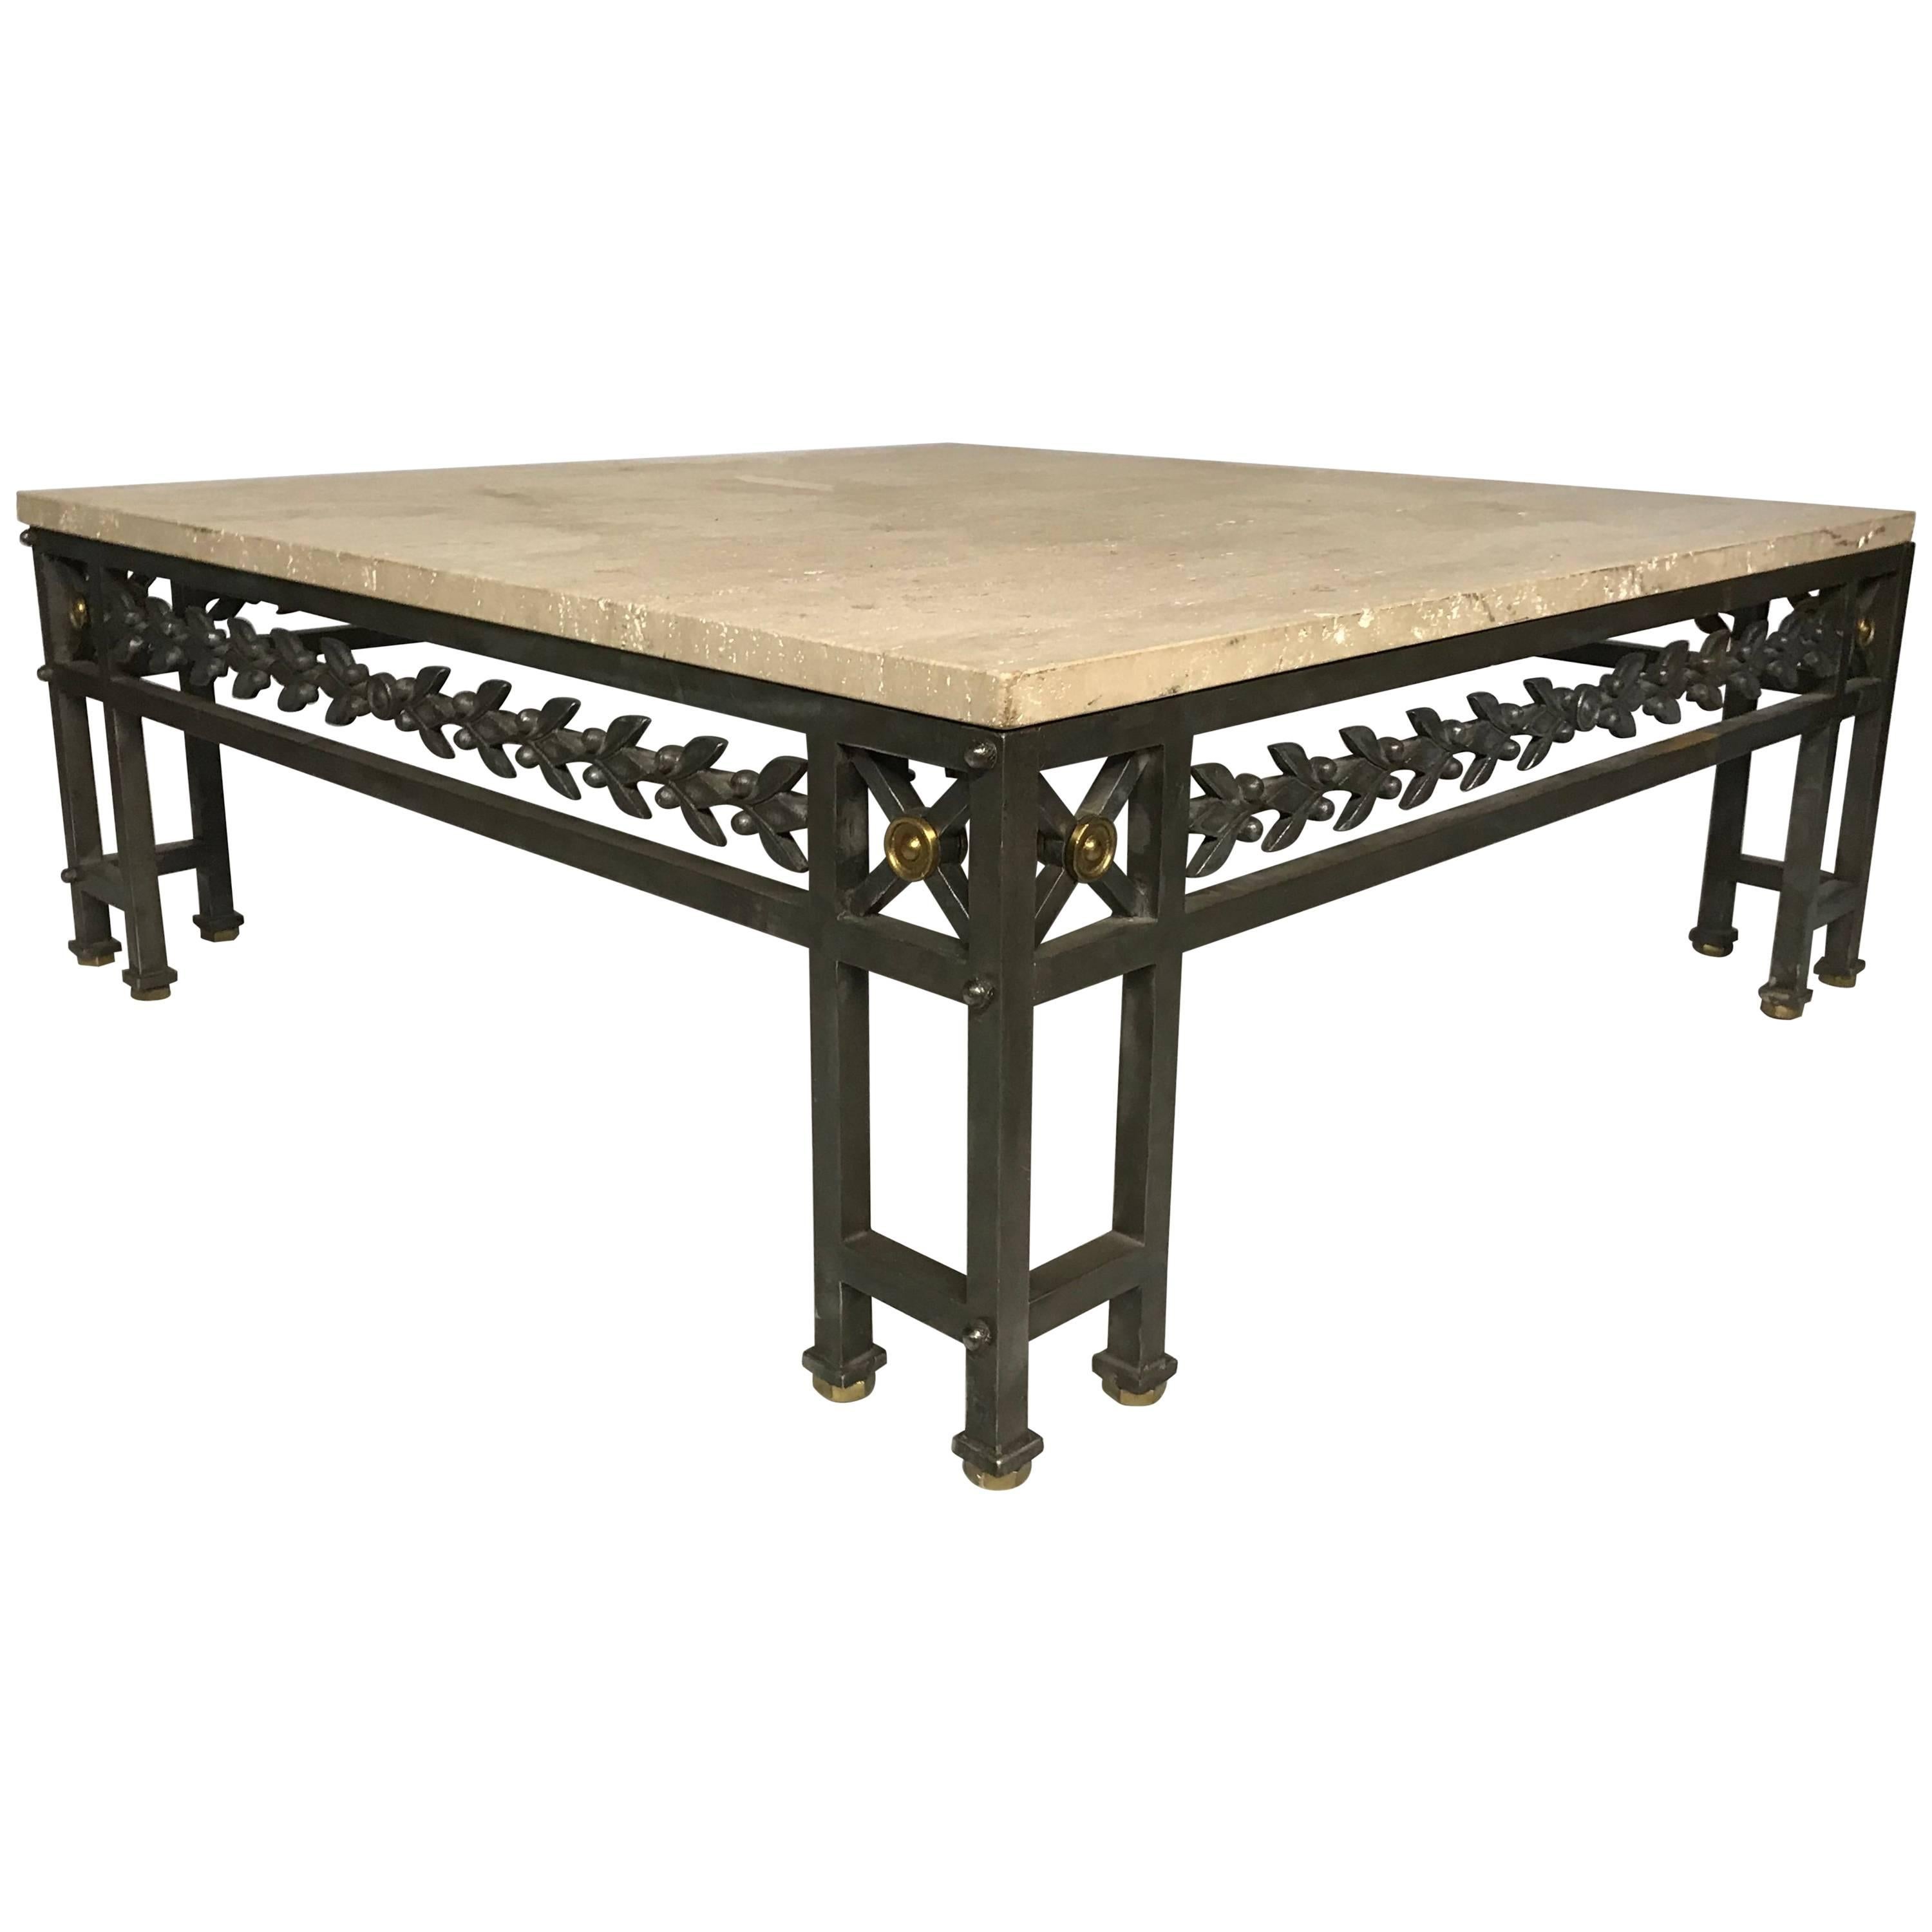 LARGE STONE, STEEL AND BRASS EMPIRE DESIGN COFFEE Table